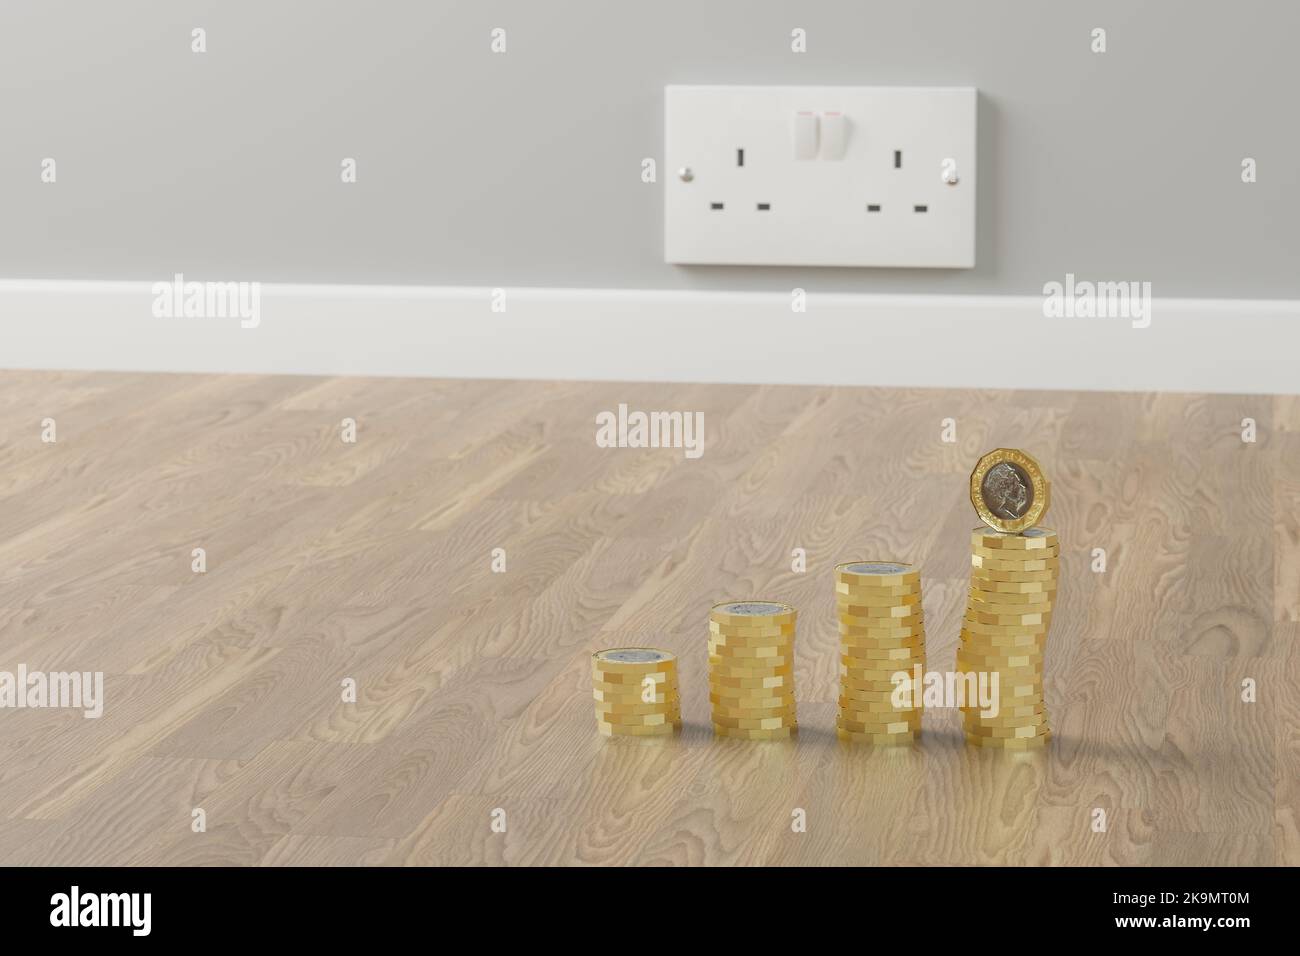 United Kingdom Electric Plug Socket with British Pound Coin, Energy Crisis Concept, 3D Illustration Stock Photo